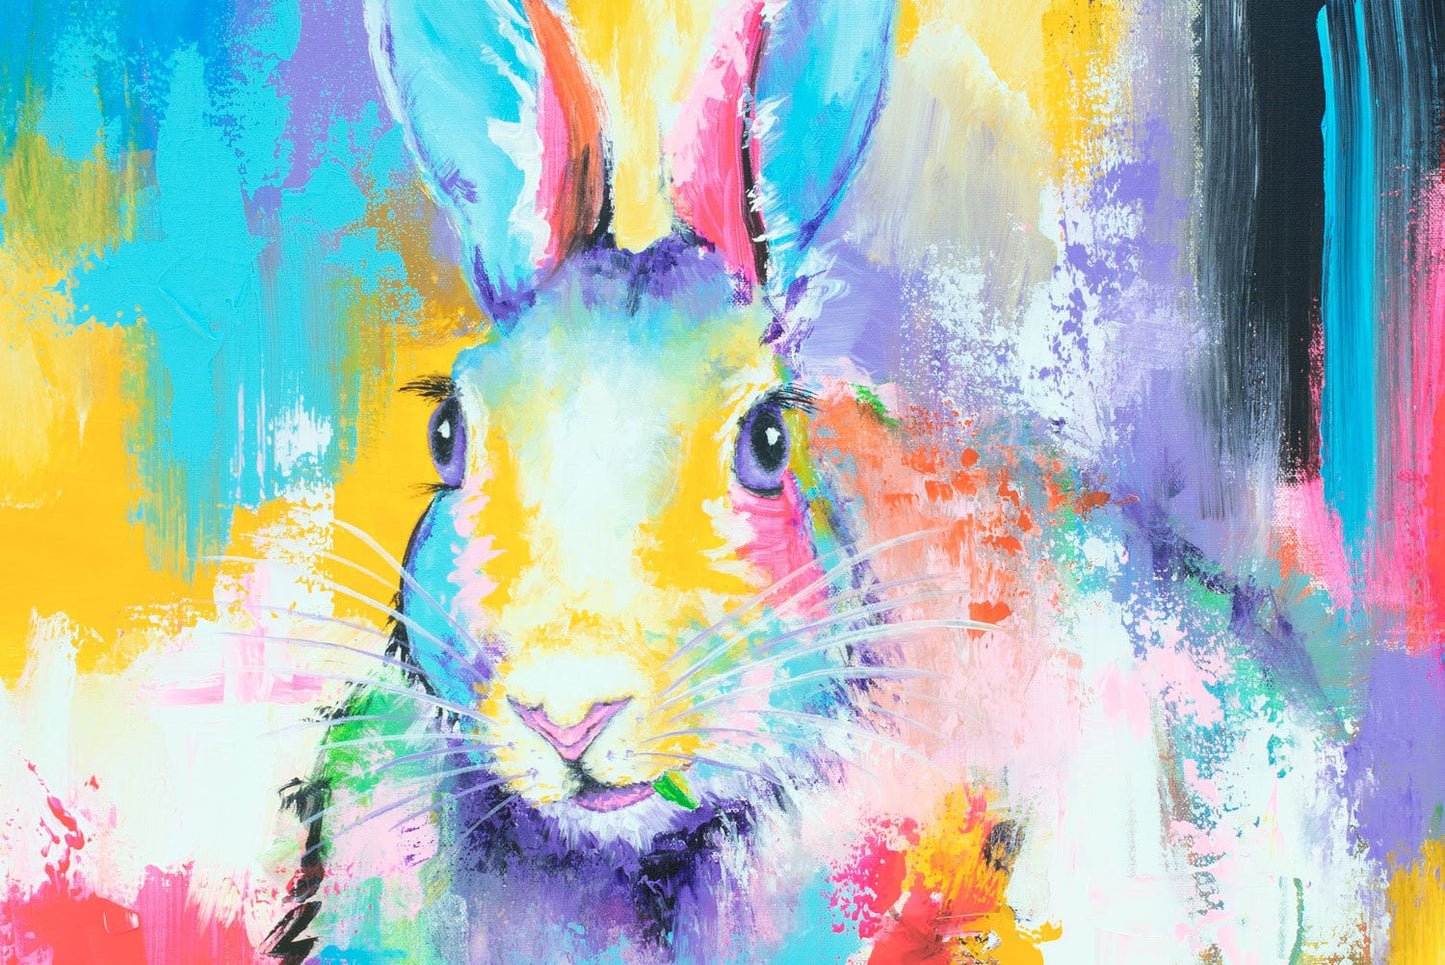 Rabbit Among the Flowers Print - Bunny Art, Rabbit Gift, Bunny Gifts. Abstract Rabbit Wall Decor by Krystle Cole